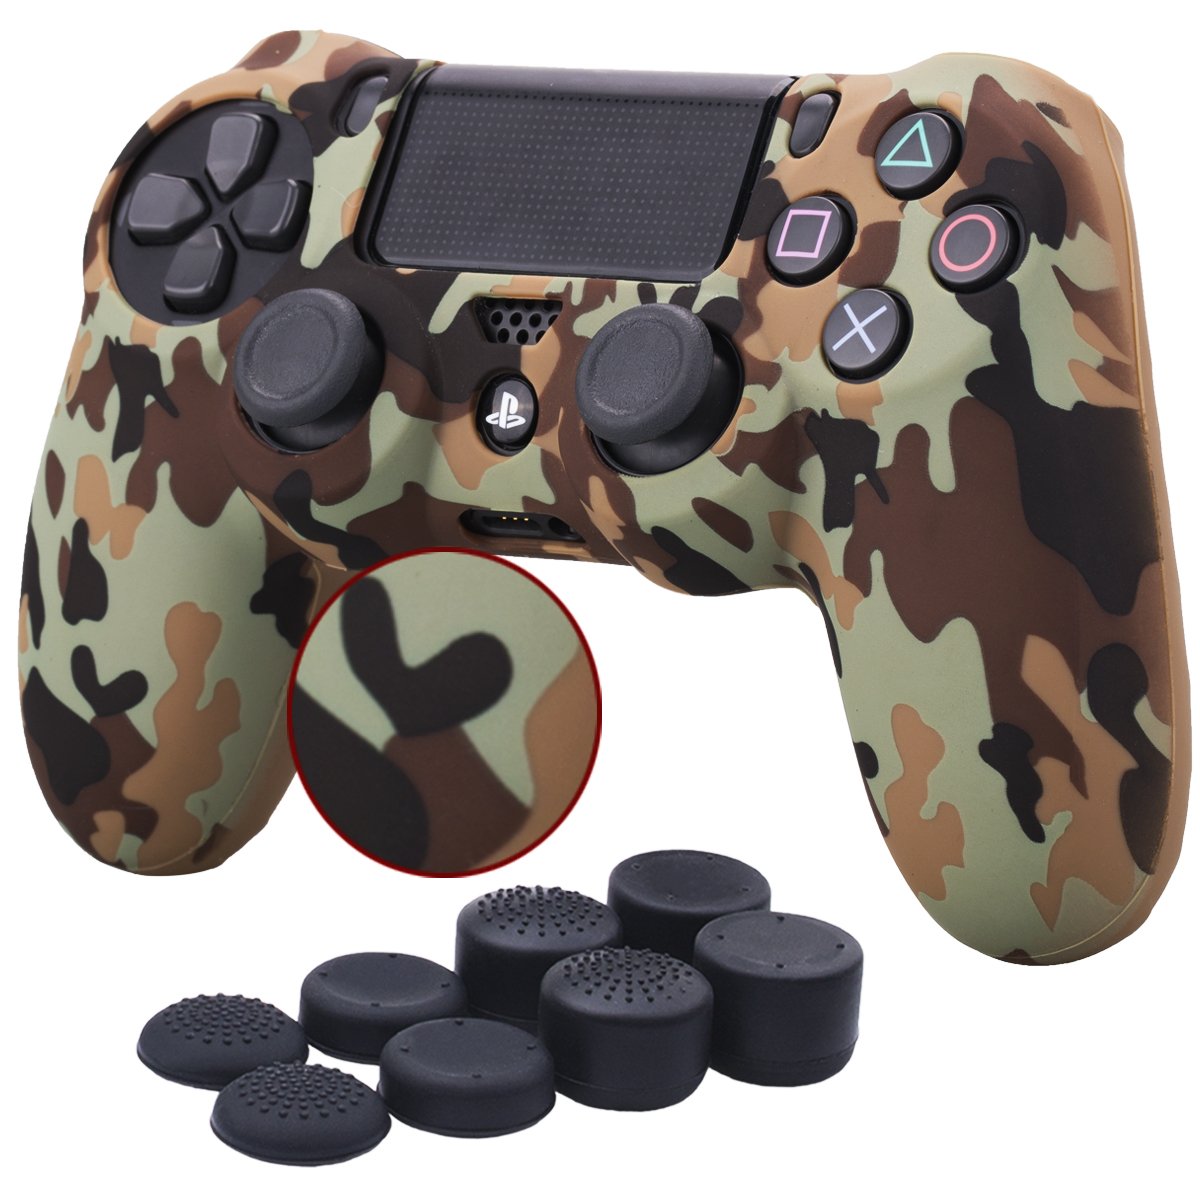 PS4 Controller Silicone Skin with Finger Grips Bundle BN29